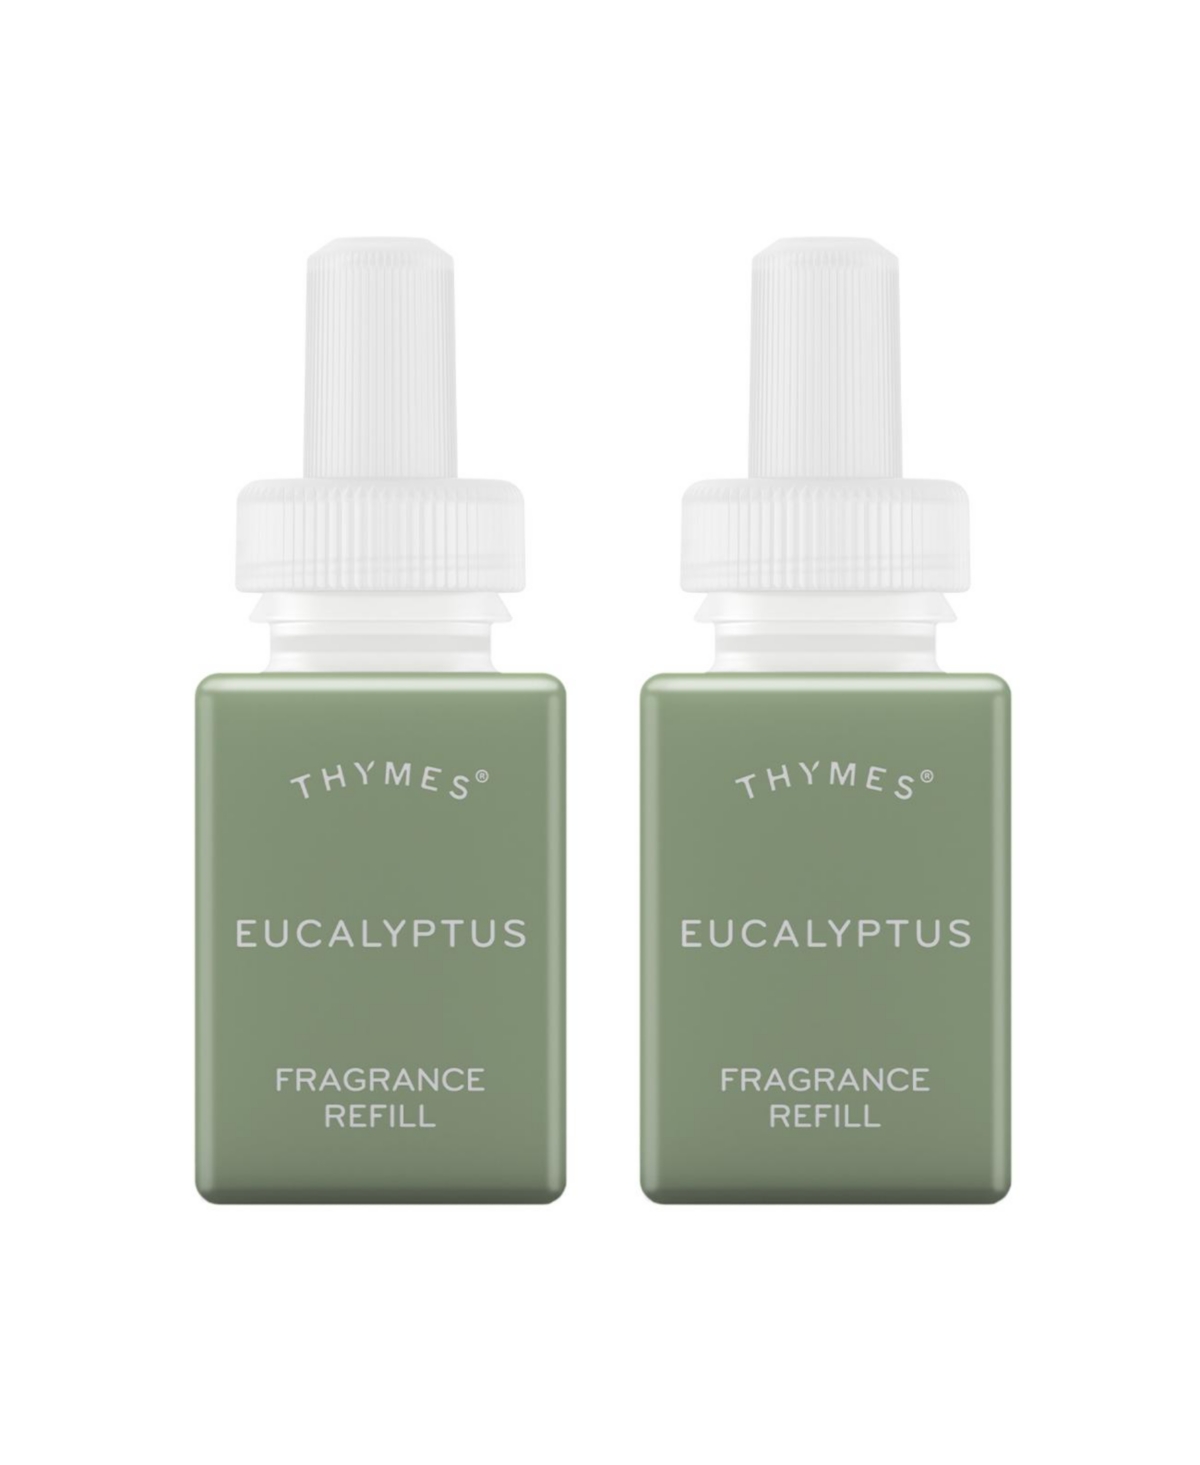 and Thymes - Eucalyptus - Fragrance for Smart Home Air Diffusers - Room Freshener - Aromatherapy Scents for Bedrooms & Living Rooms - 2 Pack